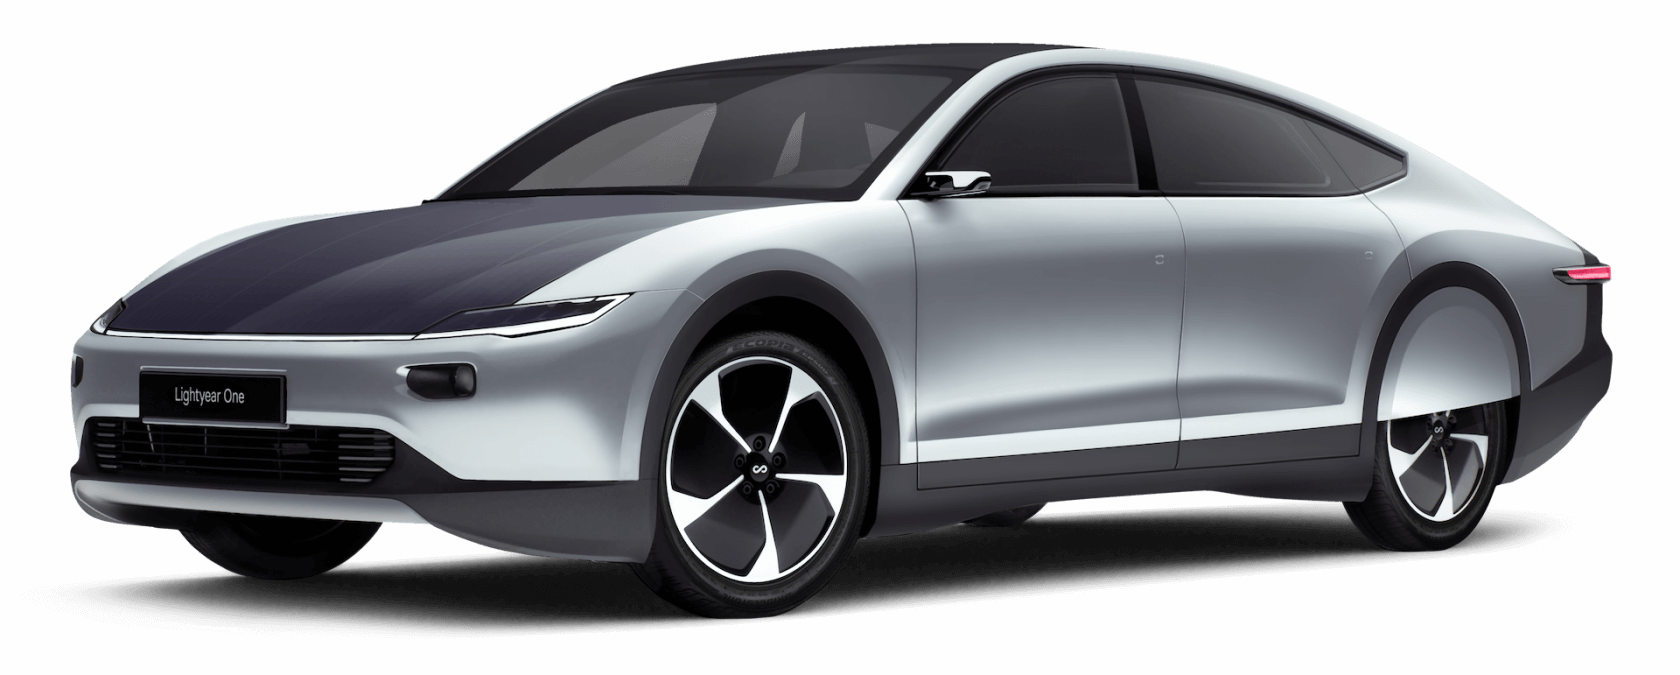 The Lightyear One is a $169,000 electric car with built-in solar panels